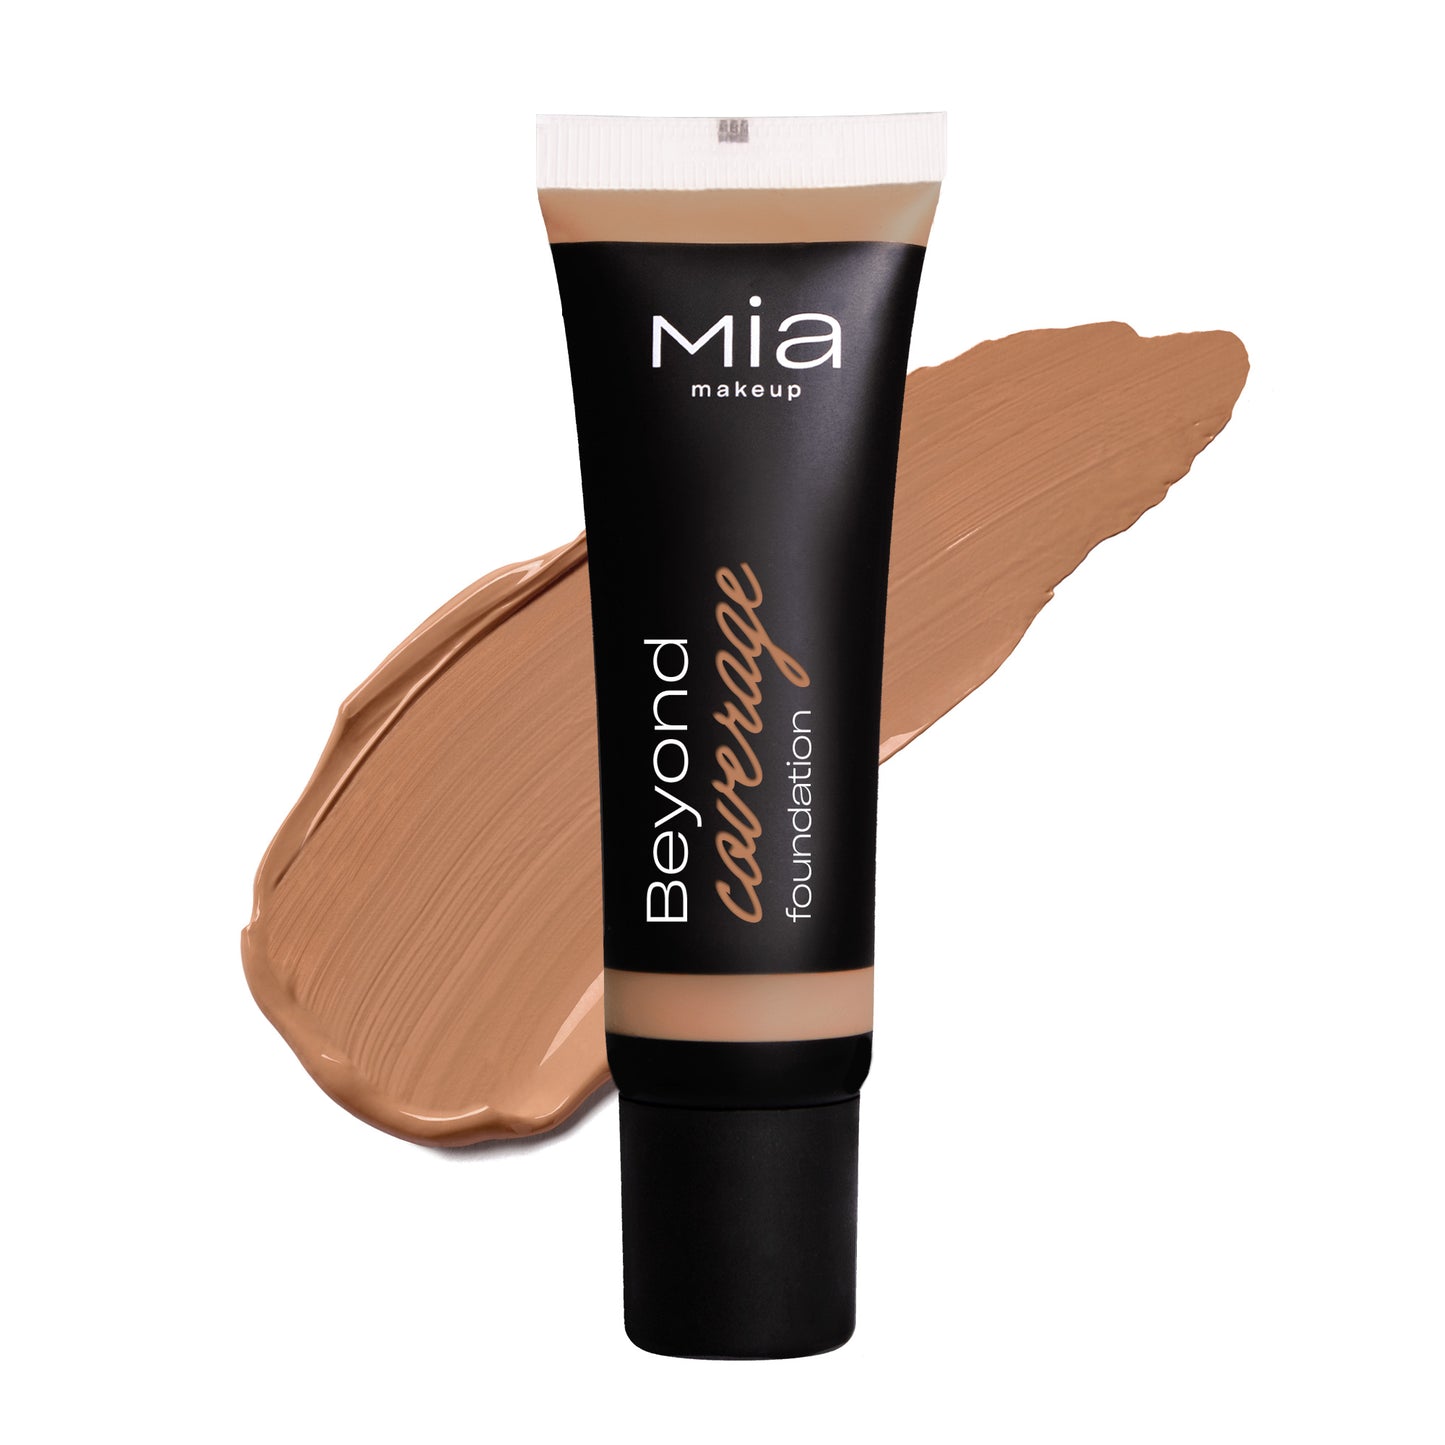 BEYOND COVERAGE FOUNDATION